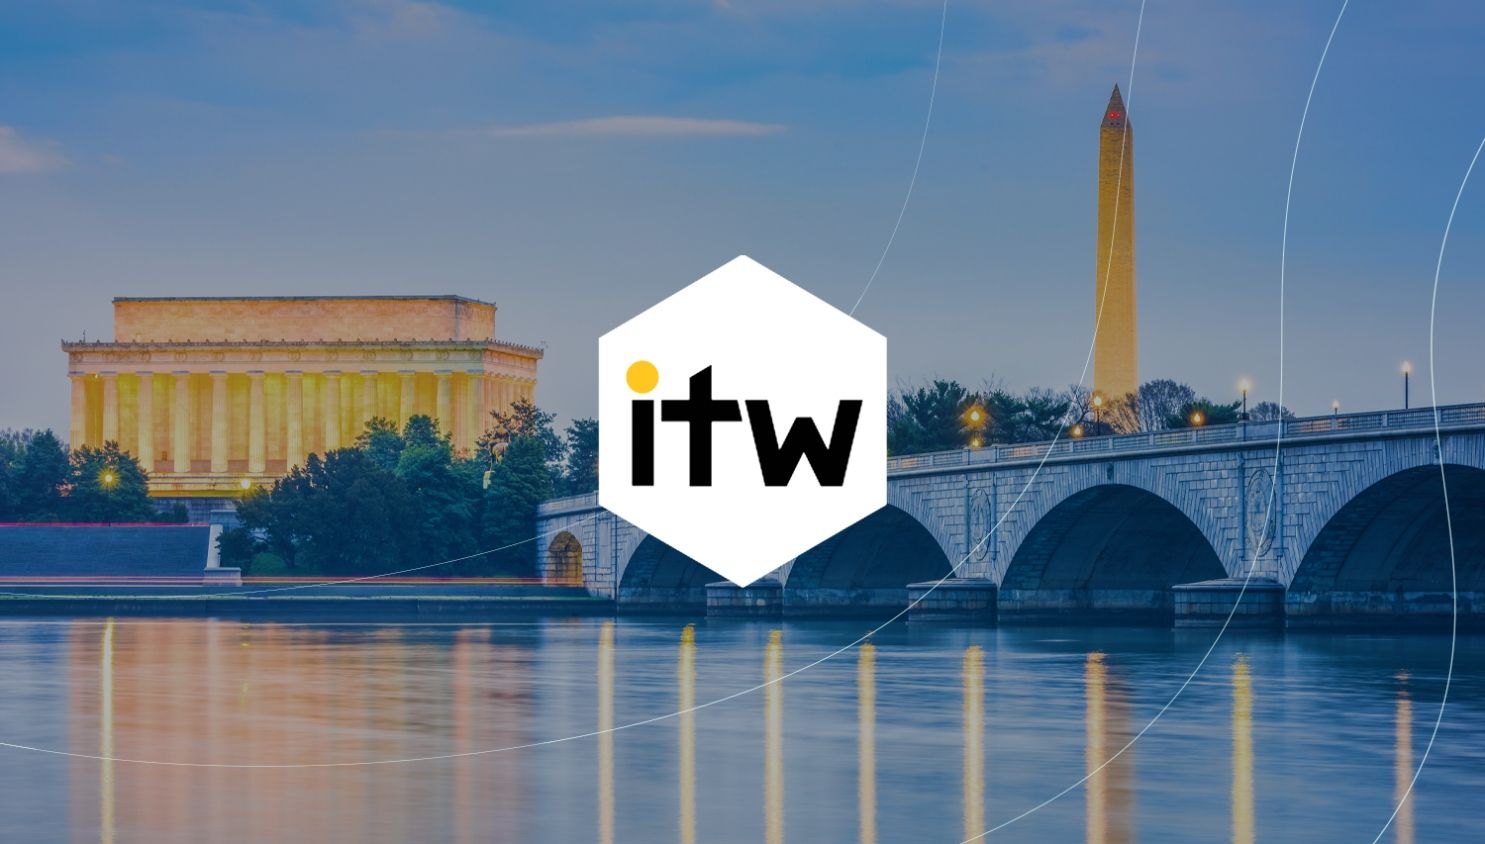 Press Release: DIDWW showcasing its latest VoIP services at ITW 2022